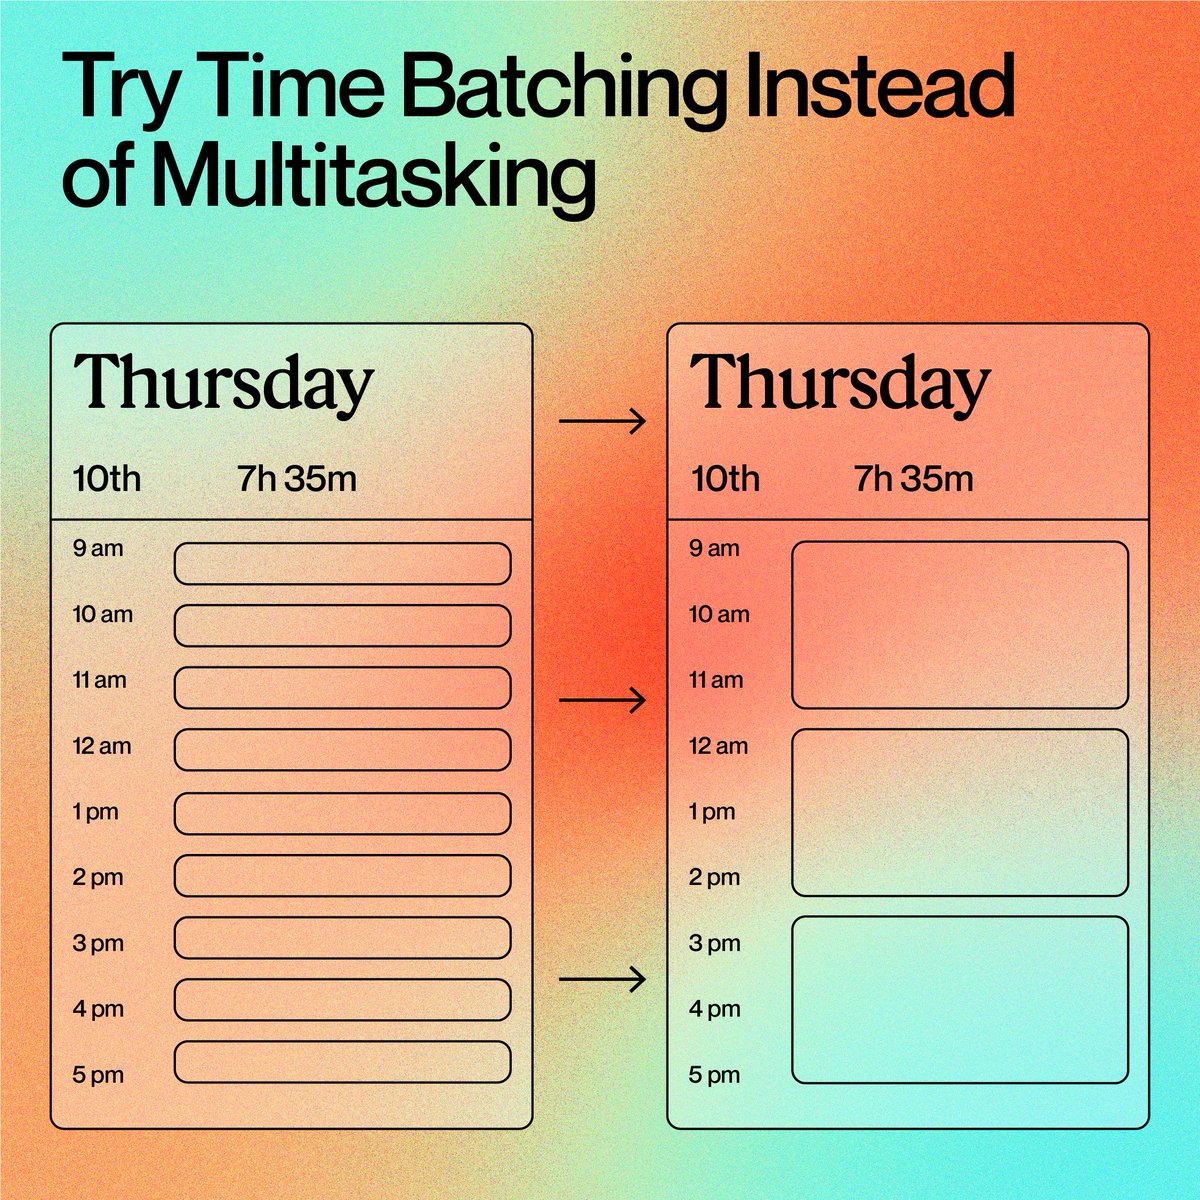 Say goodbye to multitasking and hello to laser-sharp focus! #TimeBatching lets you sort tasks into 'small,' 'medium,' and 'large' groups based on the amount of time and brainpower needed.

Find more productivity tips here! spr.ly/WorkSmarter